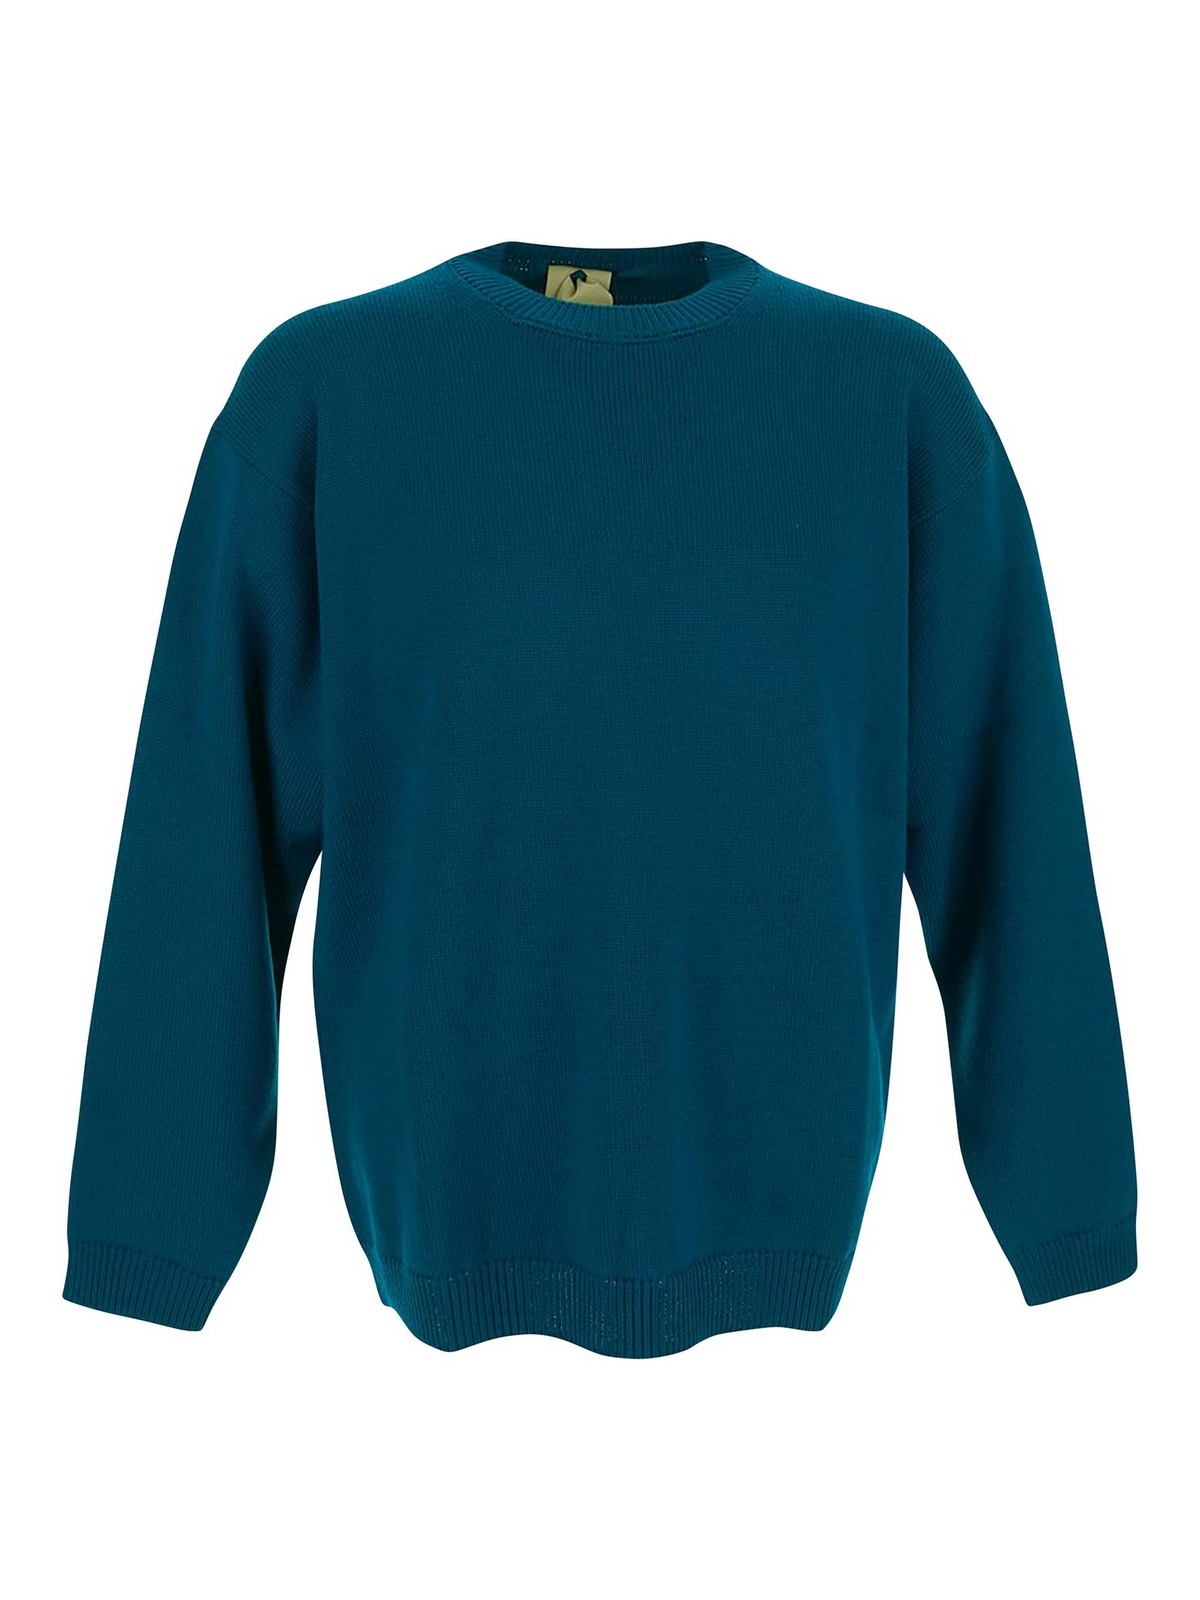 TEN C BLUE CREWNECK WITH LONG SLEEVES